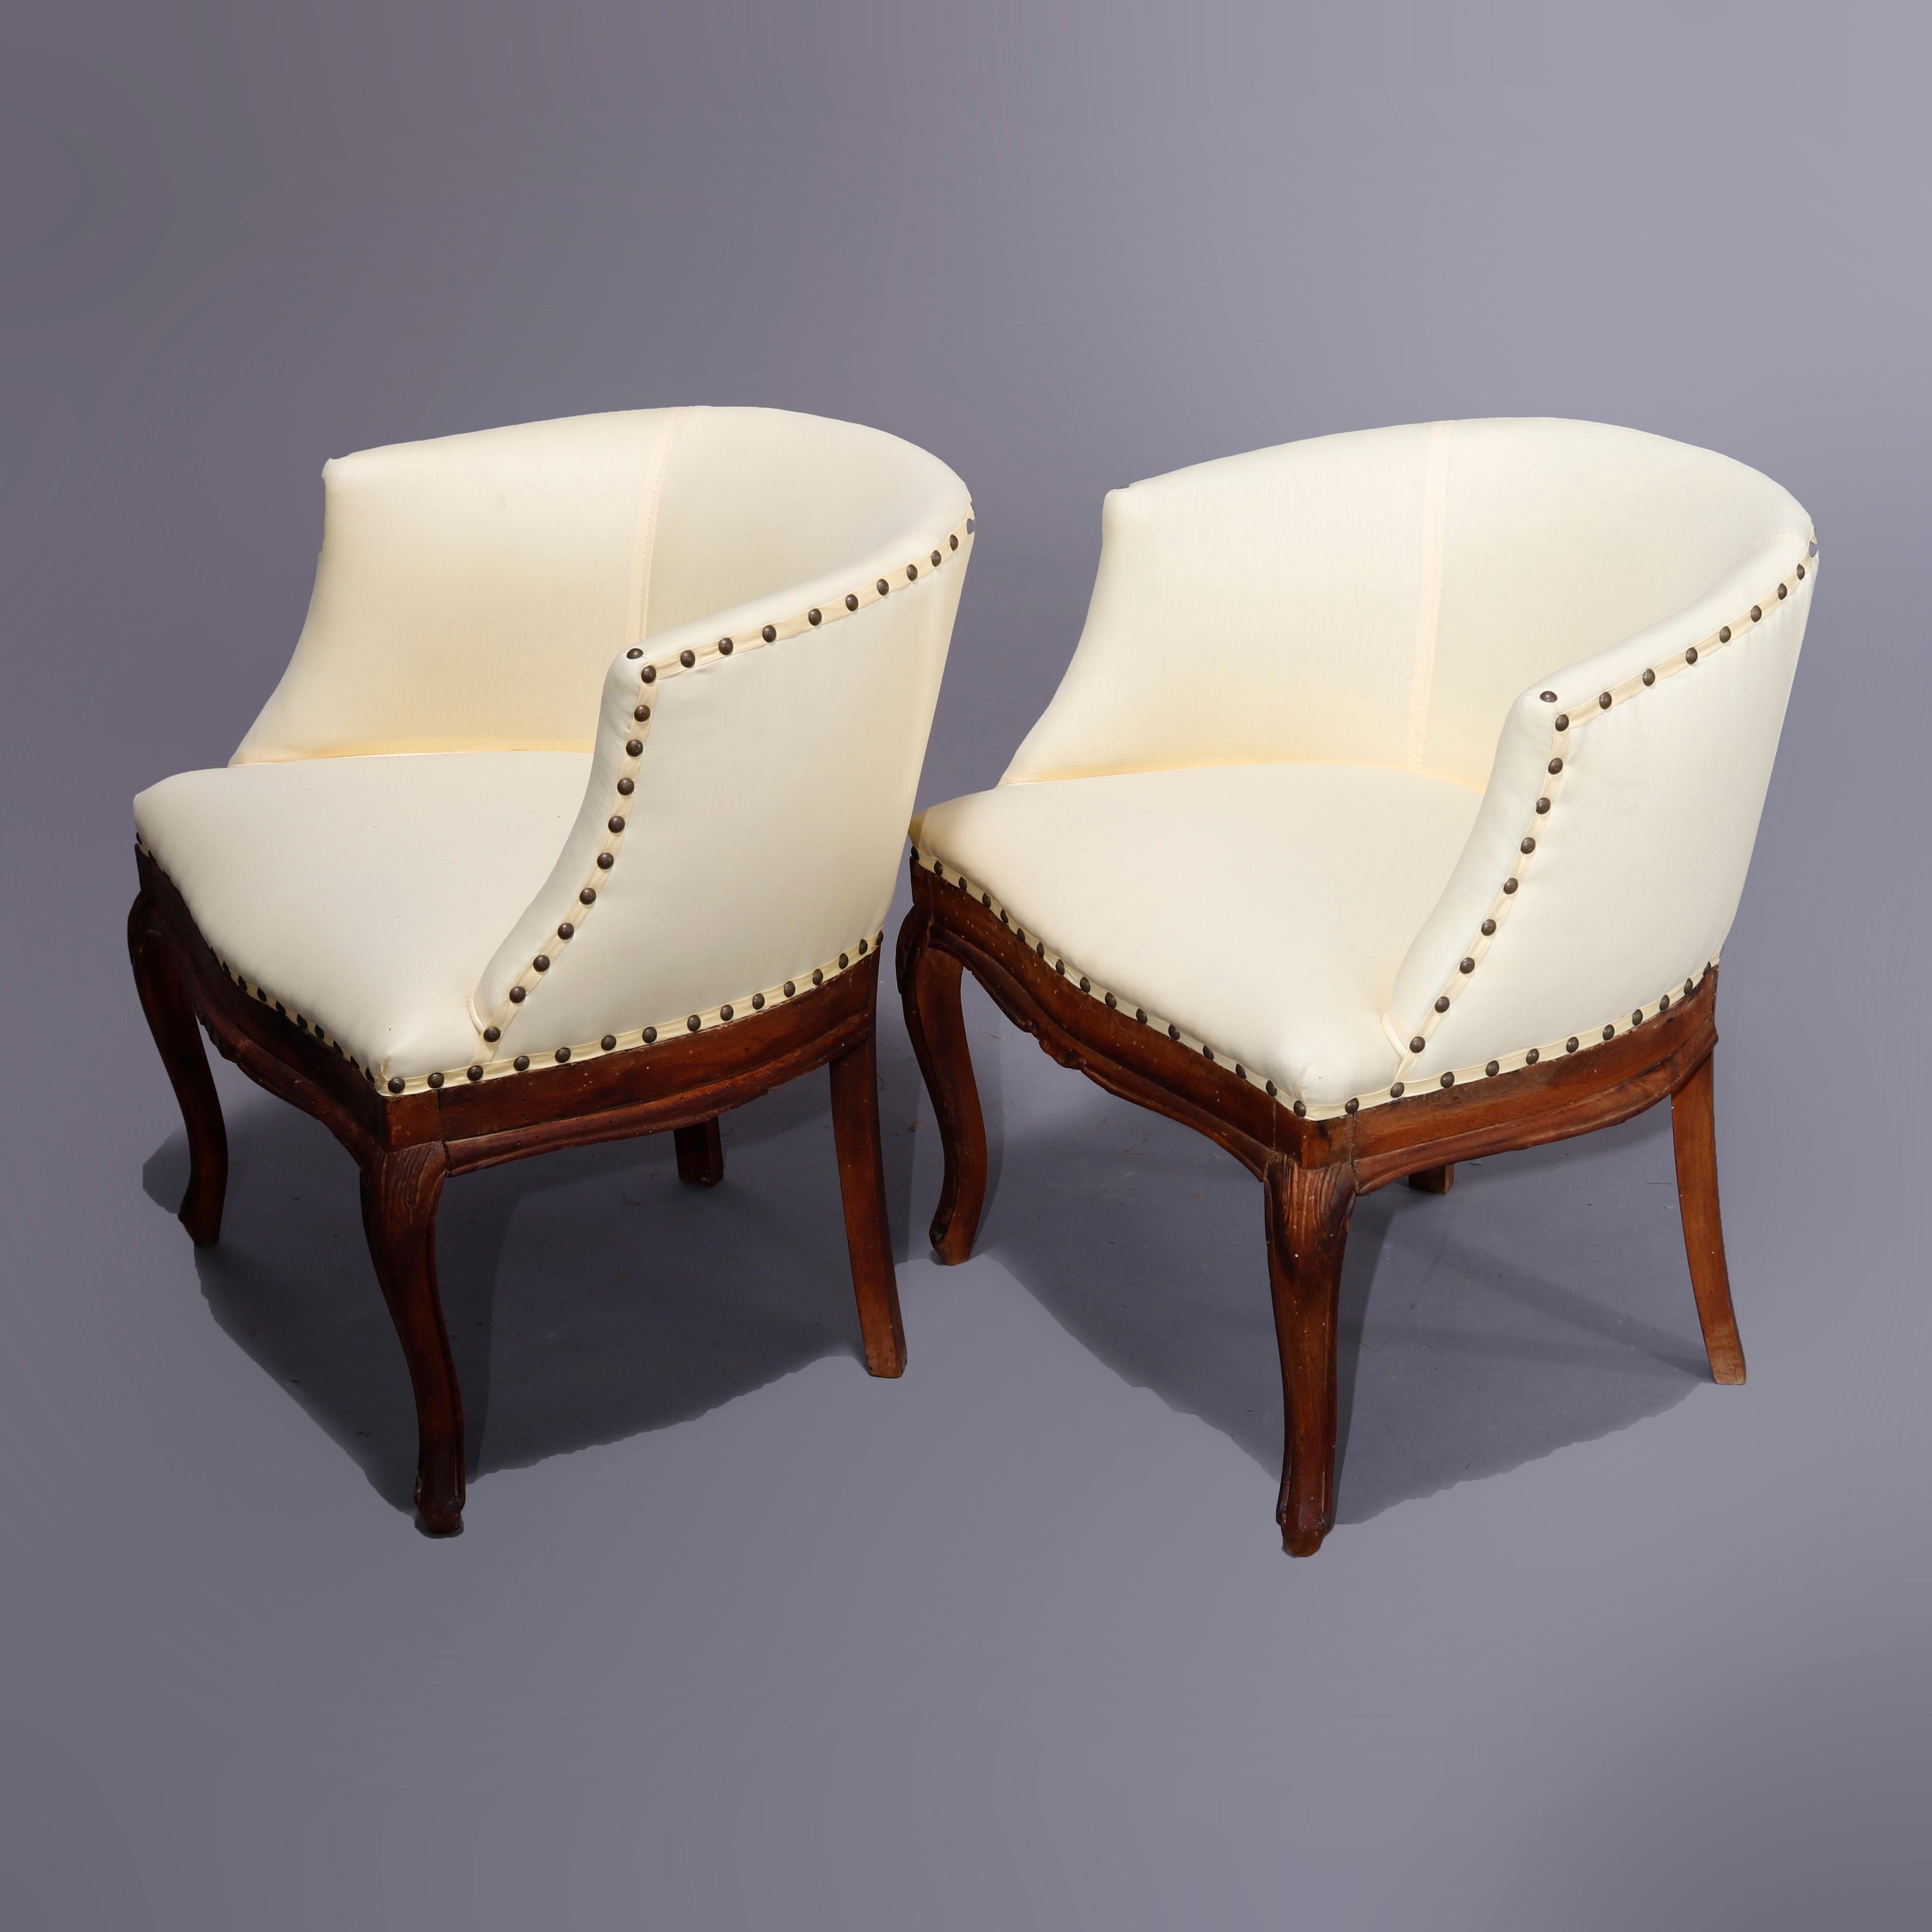 Carved Antique Italian Walnut Side or Lounge Chairs, Late 18th to Early 19th Century